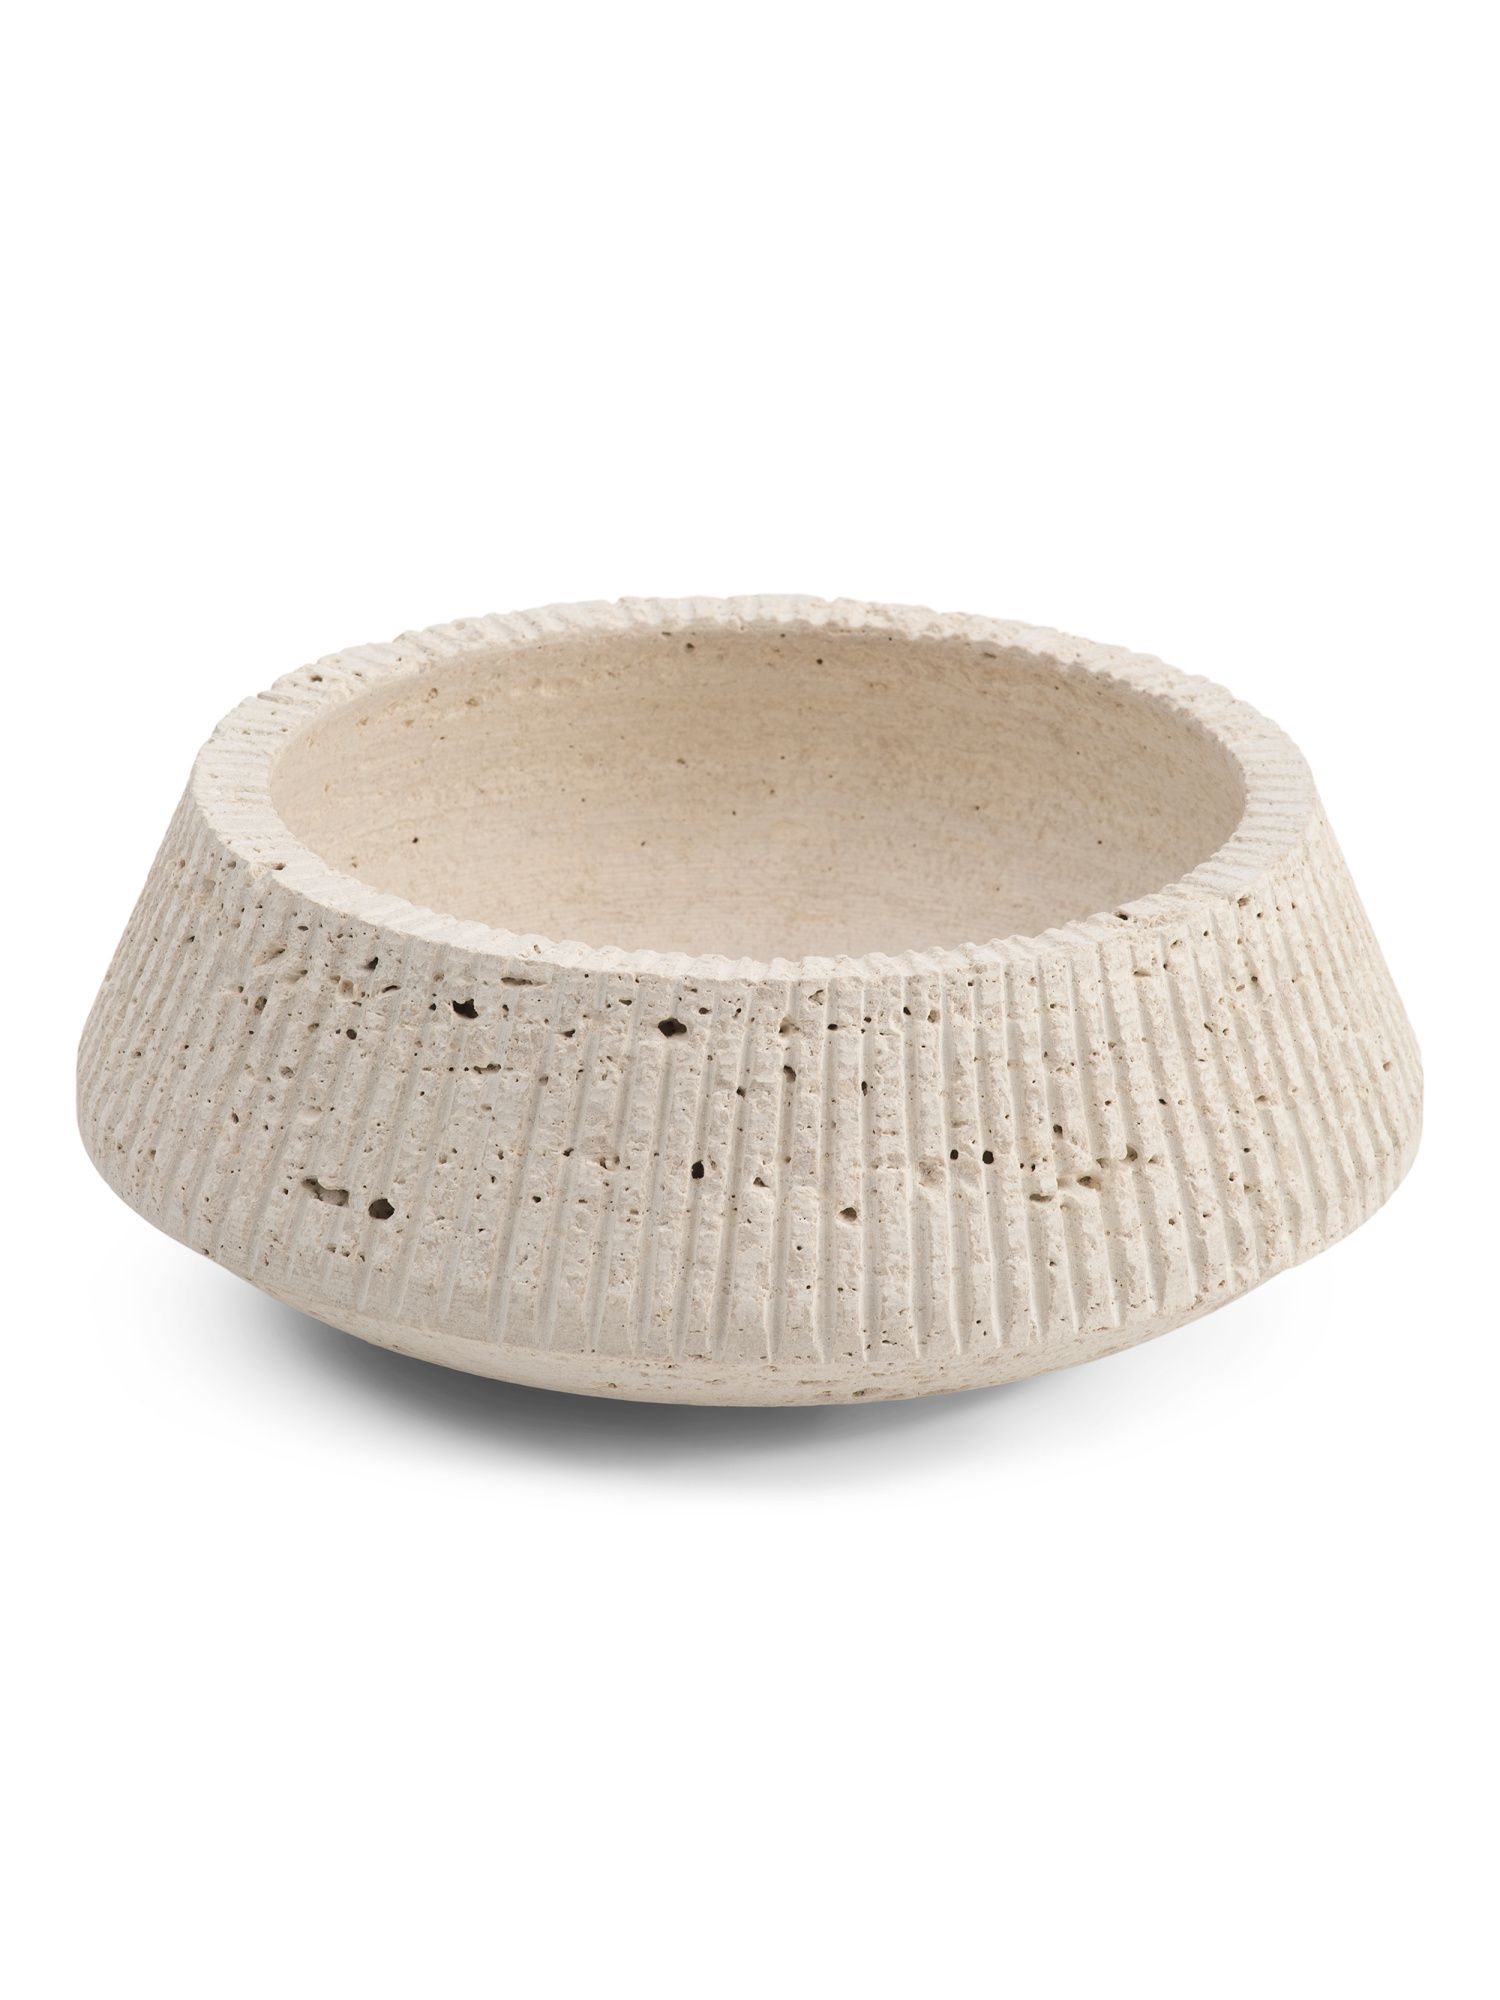 8in Travertine Fruit And Nut Bowl | TJ Maxx